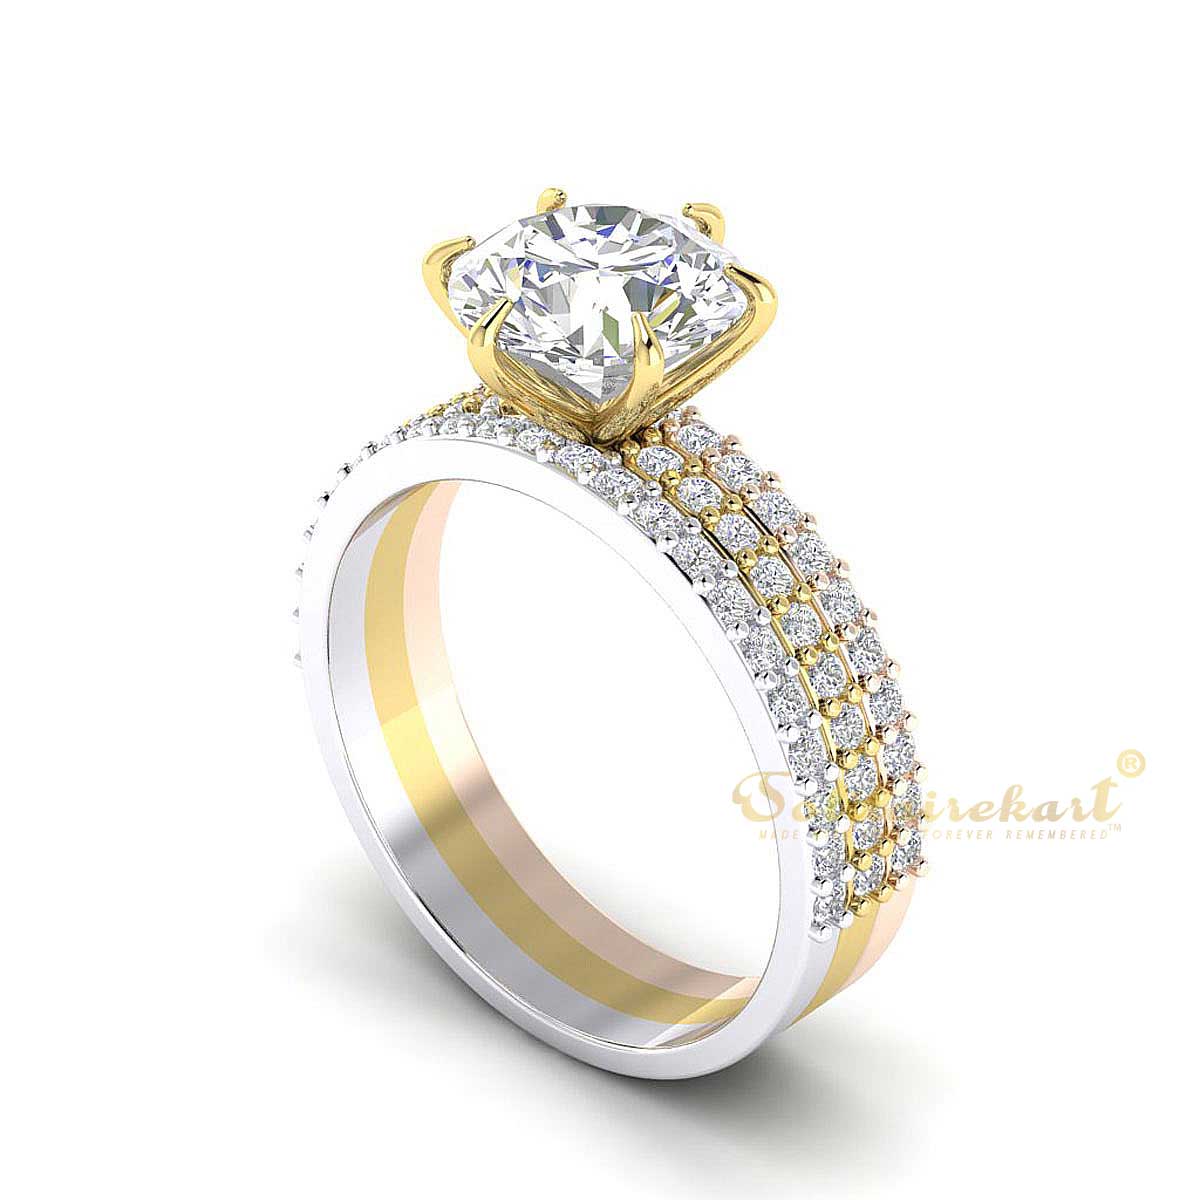 Buy quality Exquisite Gold Ring Design For Women in Pune